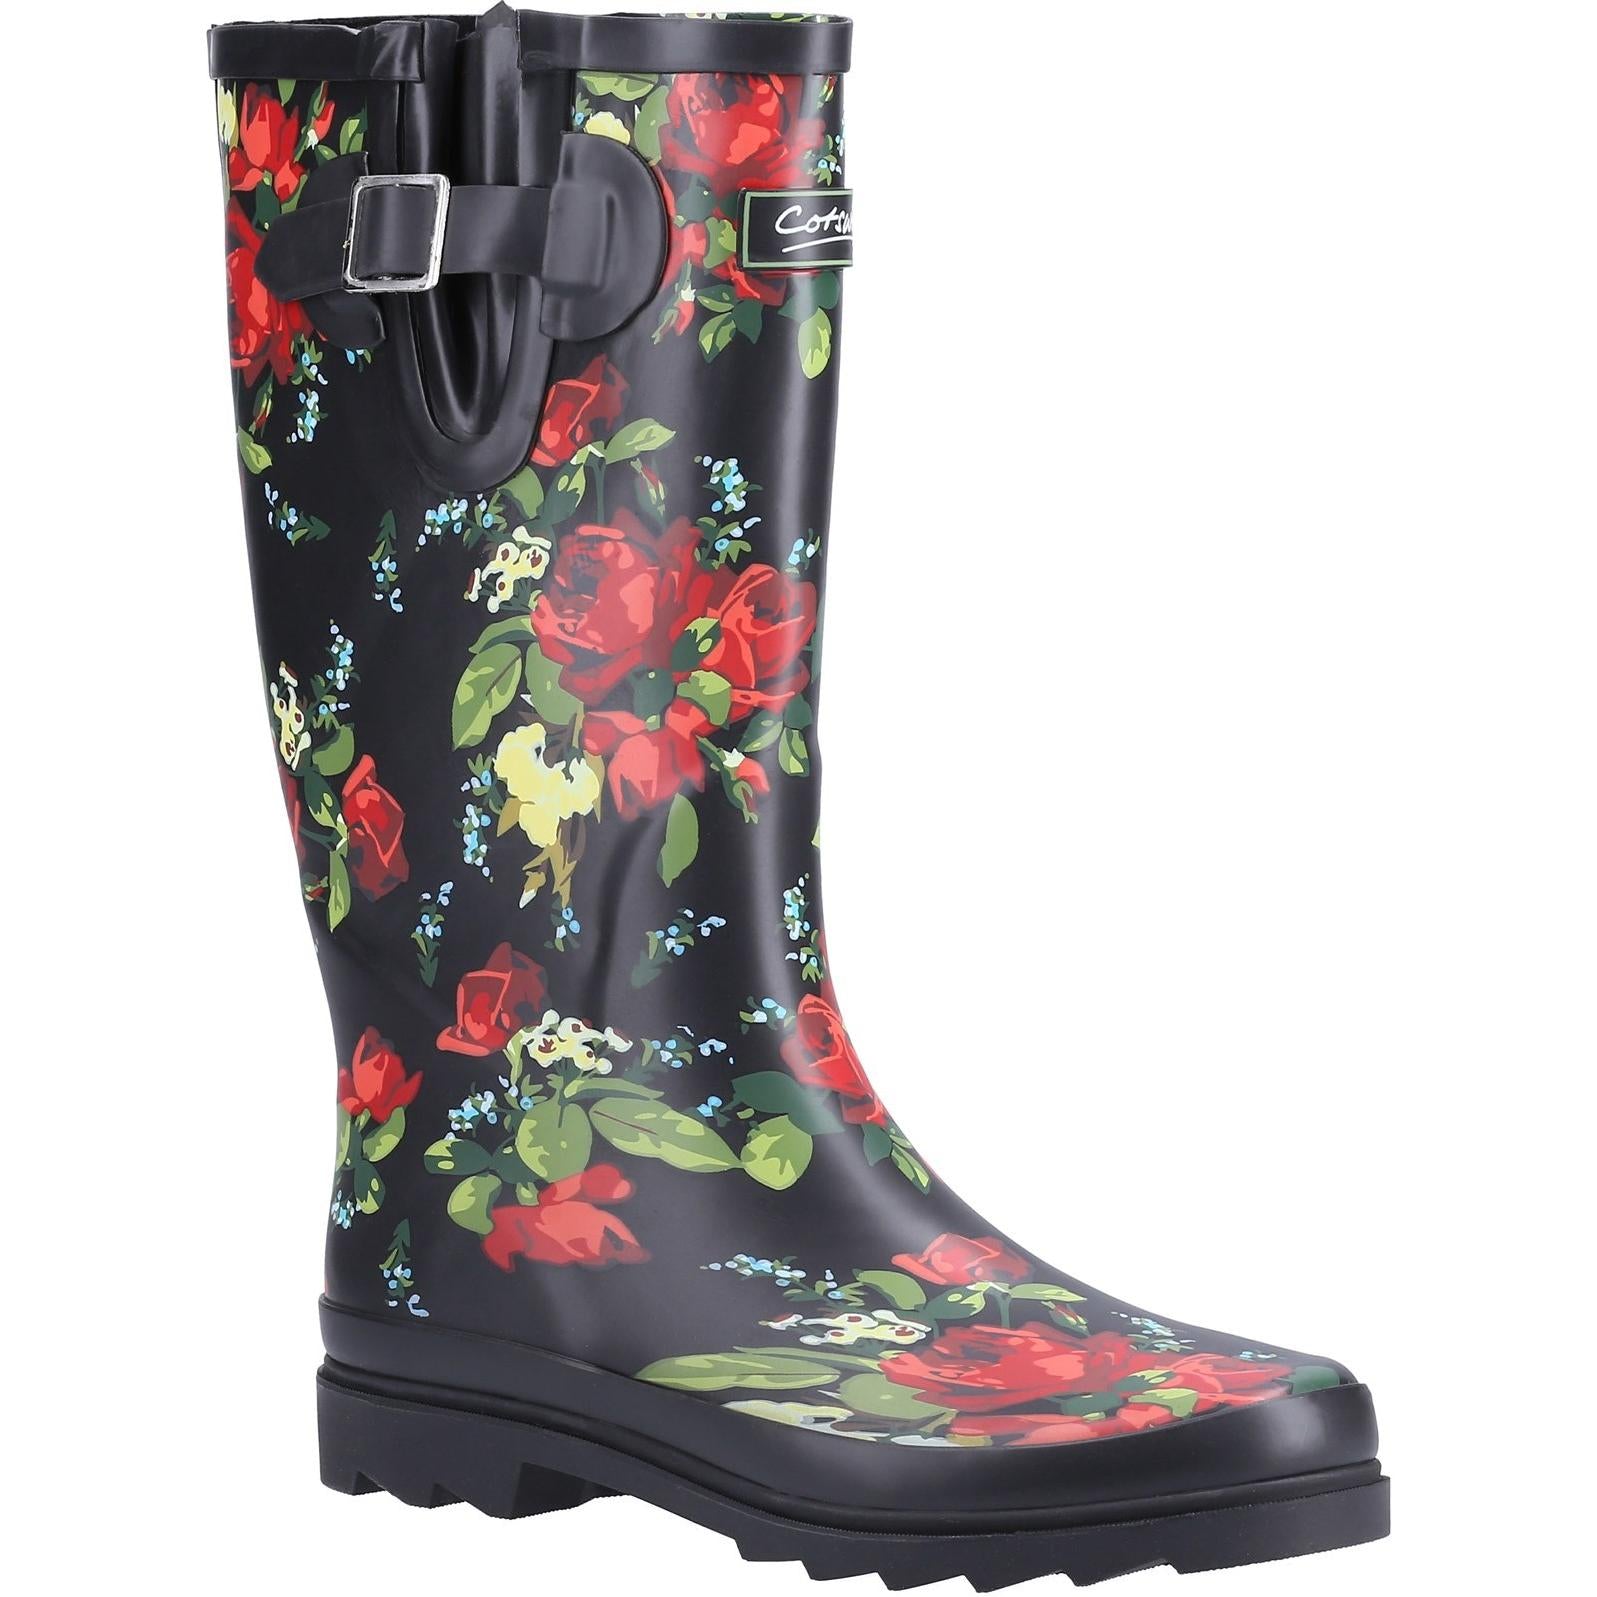 Cotswold Blossom Welly Boots